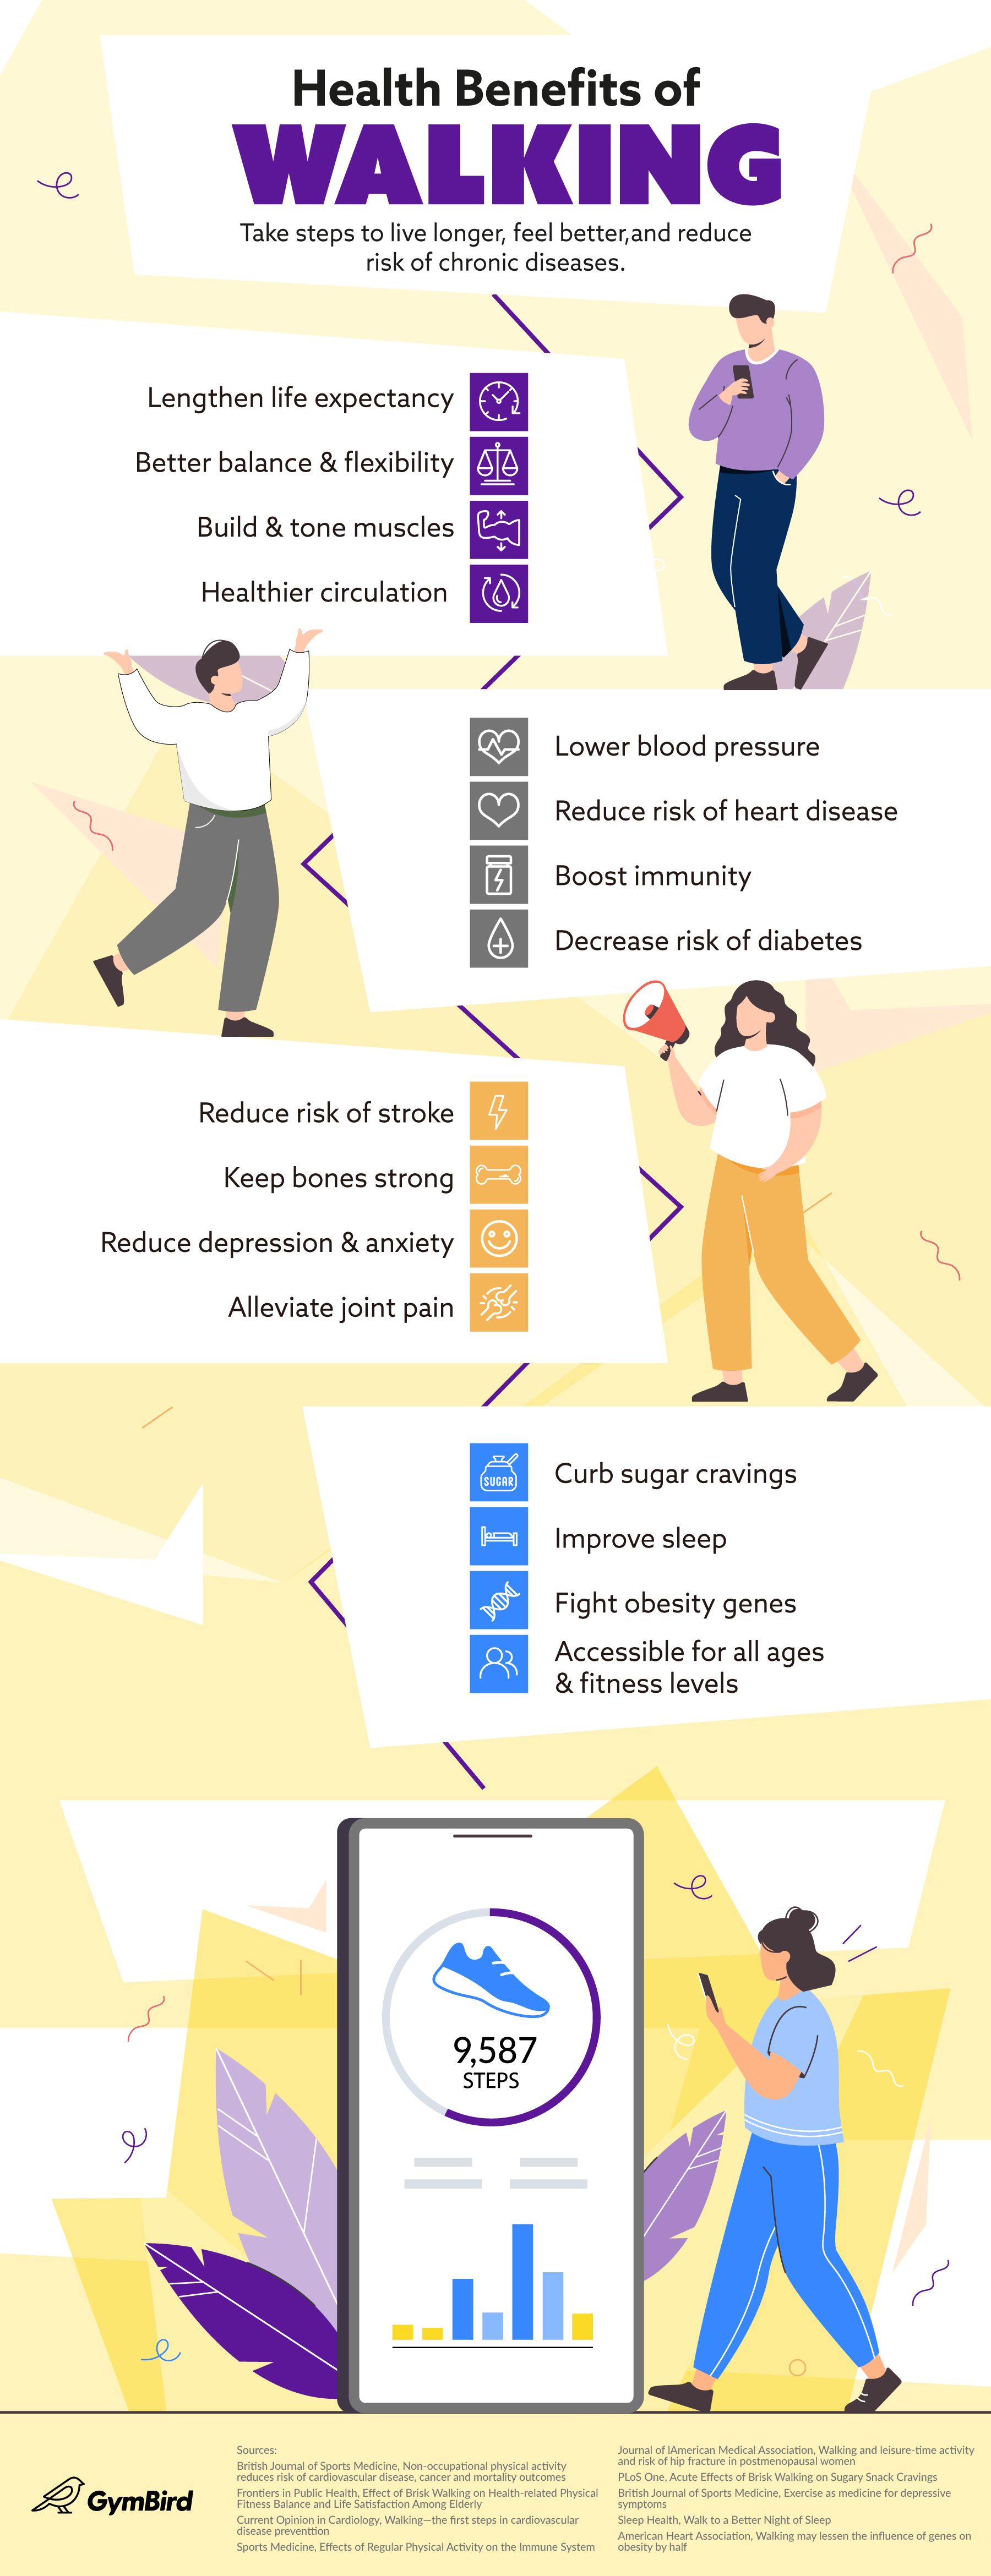 The Benefits of Walking